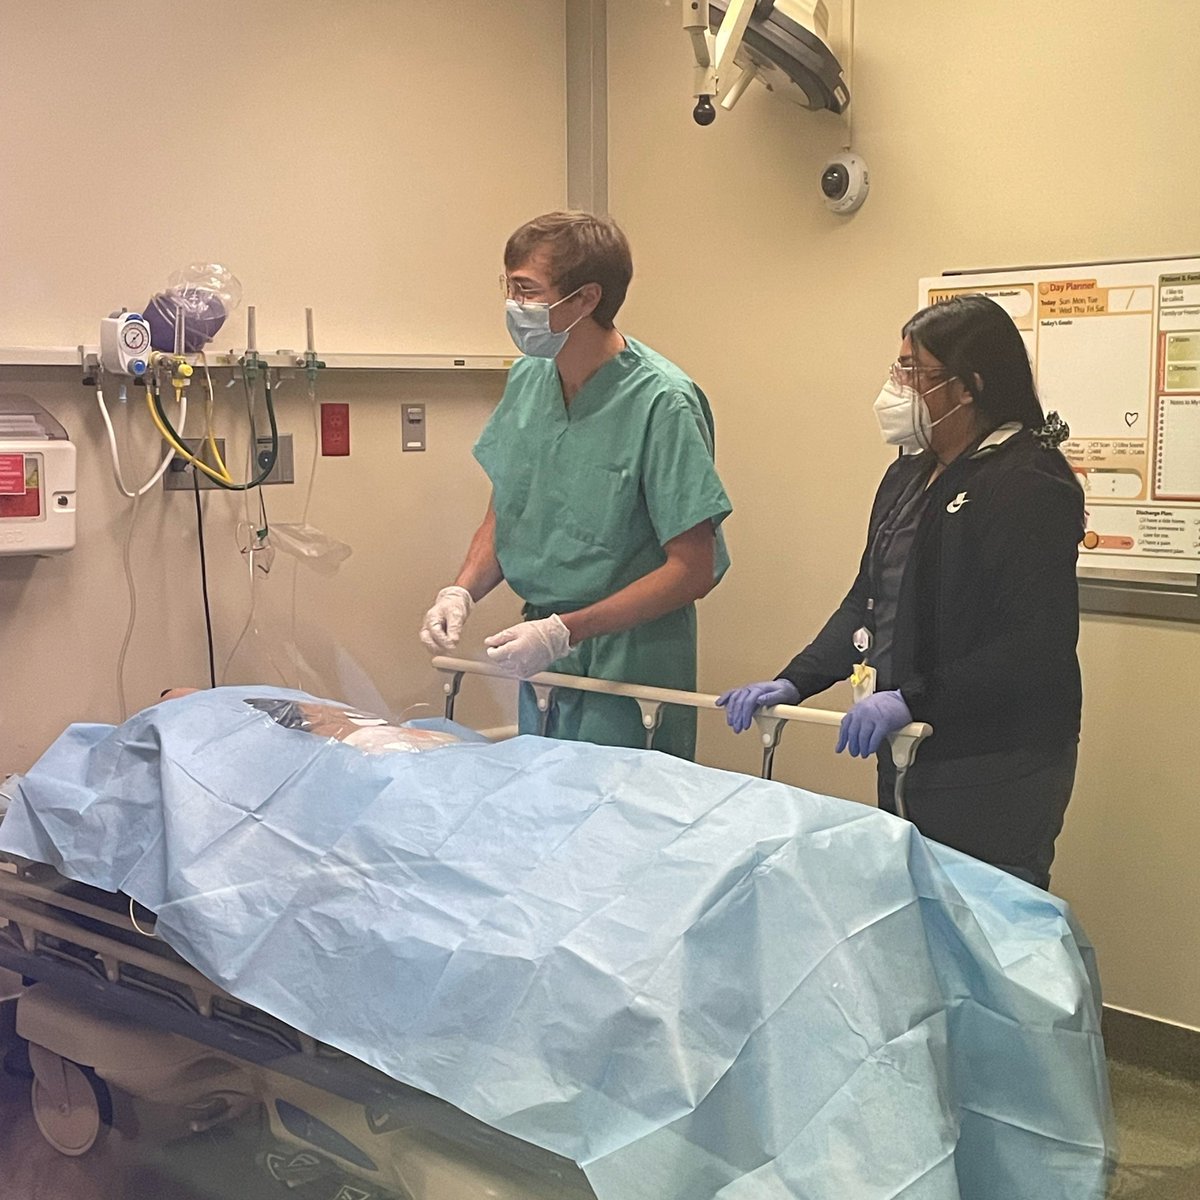 Our new @uamshealth Interventional Radiology #IR residents @uams_com @uams_ir participate in #simulation education led by Dr Mollie Meek, MD & Dr Erin Priddy, MD 🌟🤩🌟 Rehearsing contrast reaction and conscious sedation management to optimize our outcomes @SSHorg @MollieMeekIR